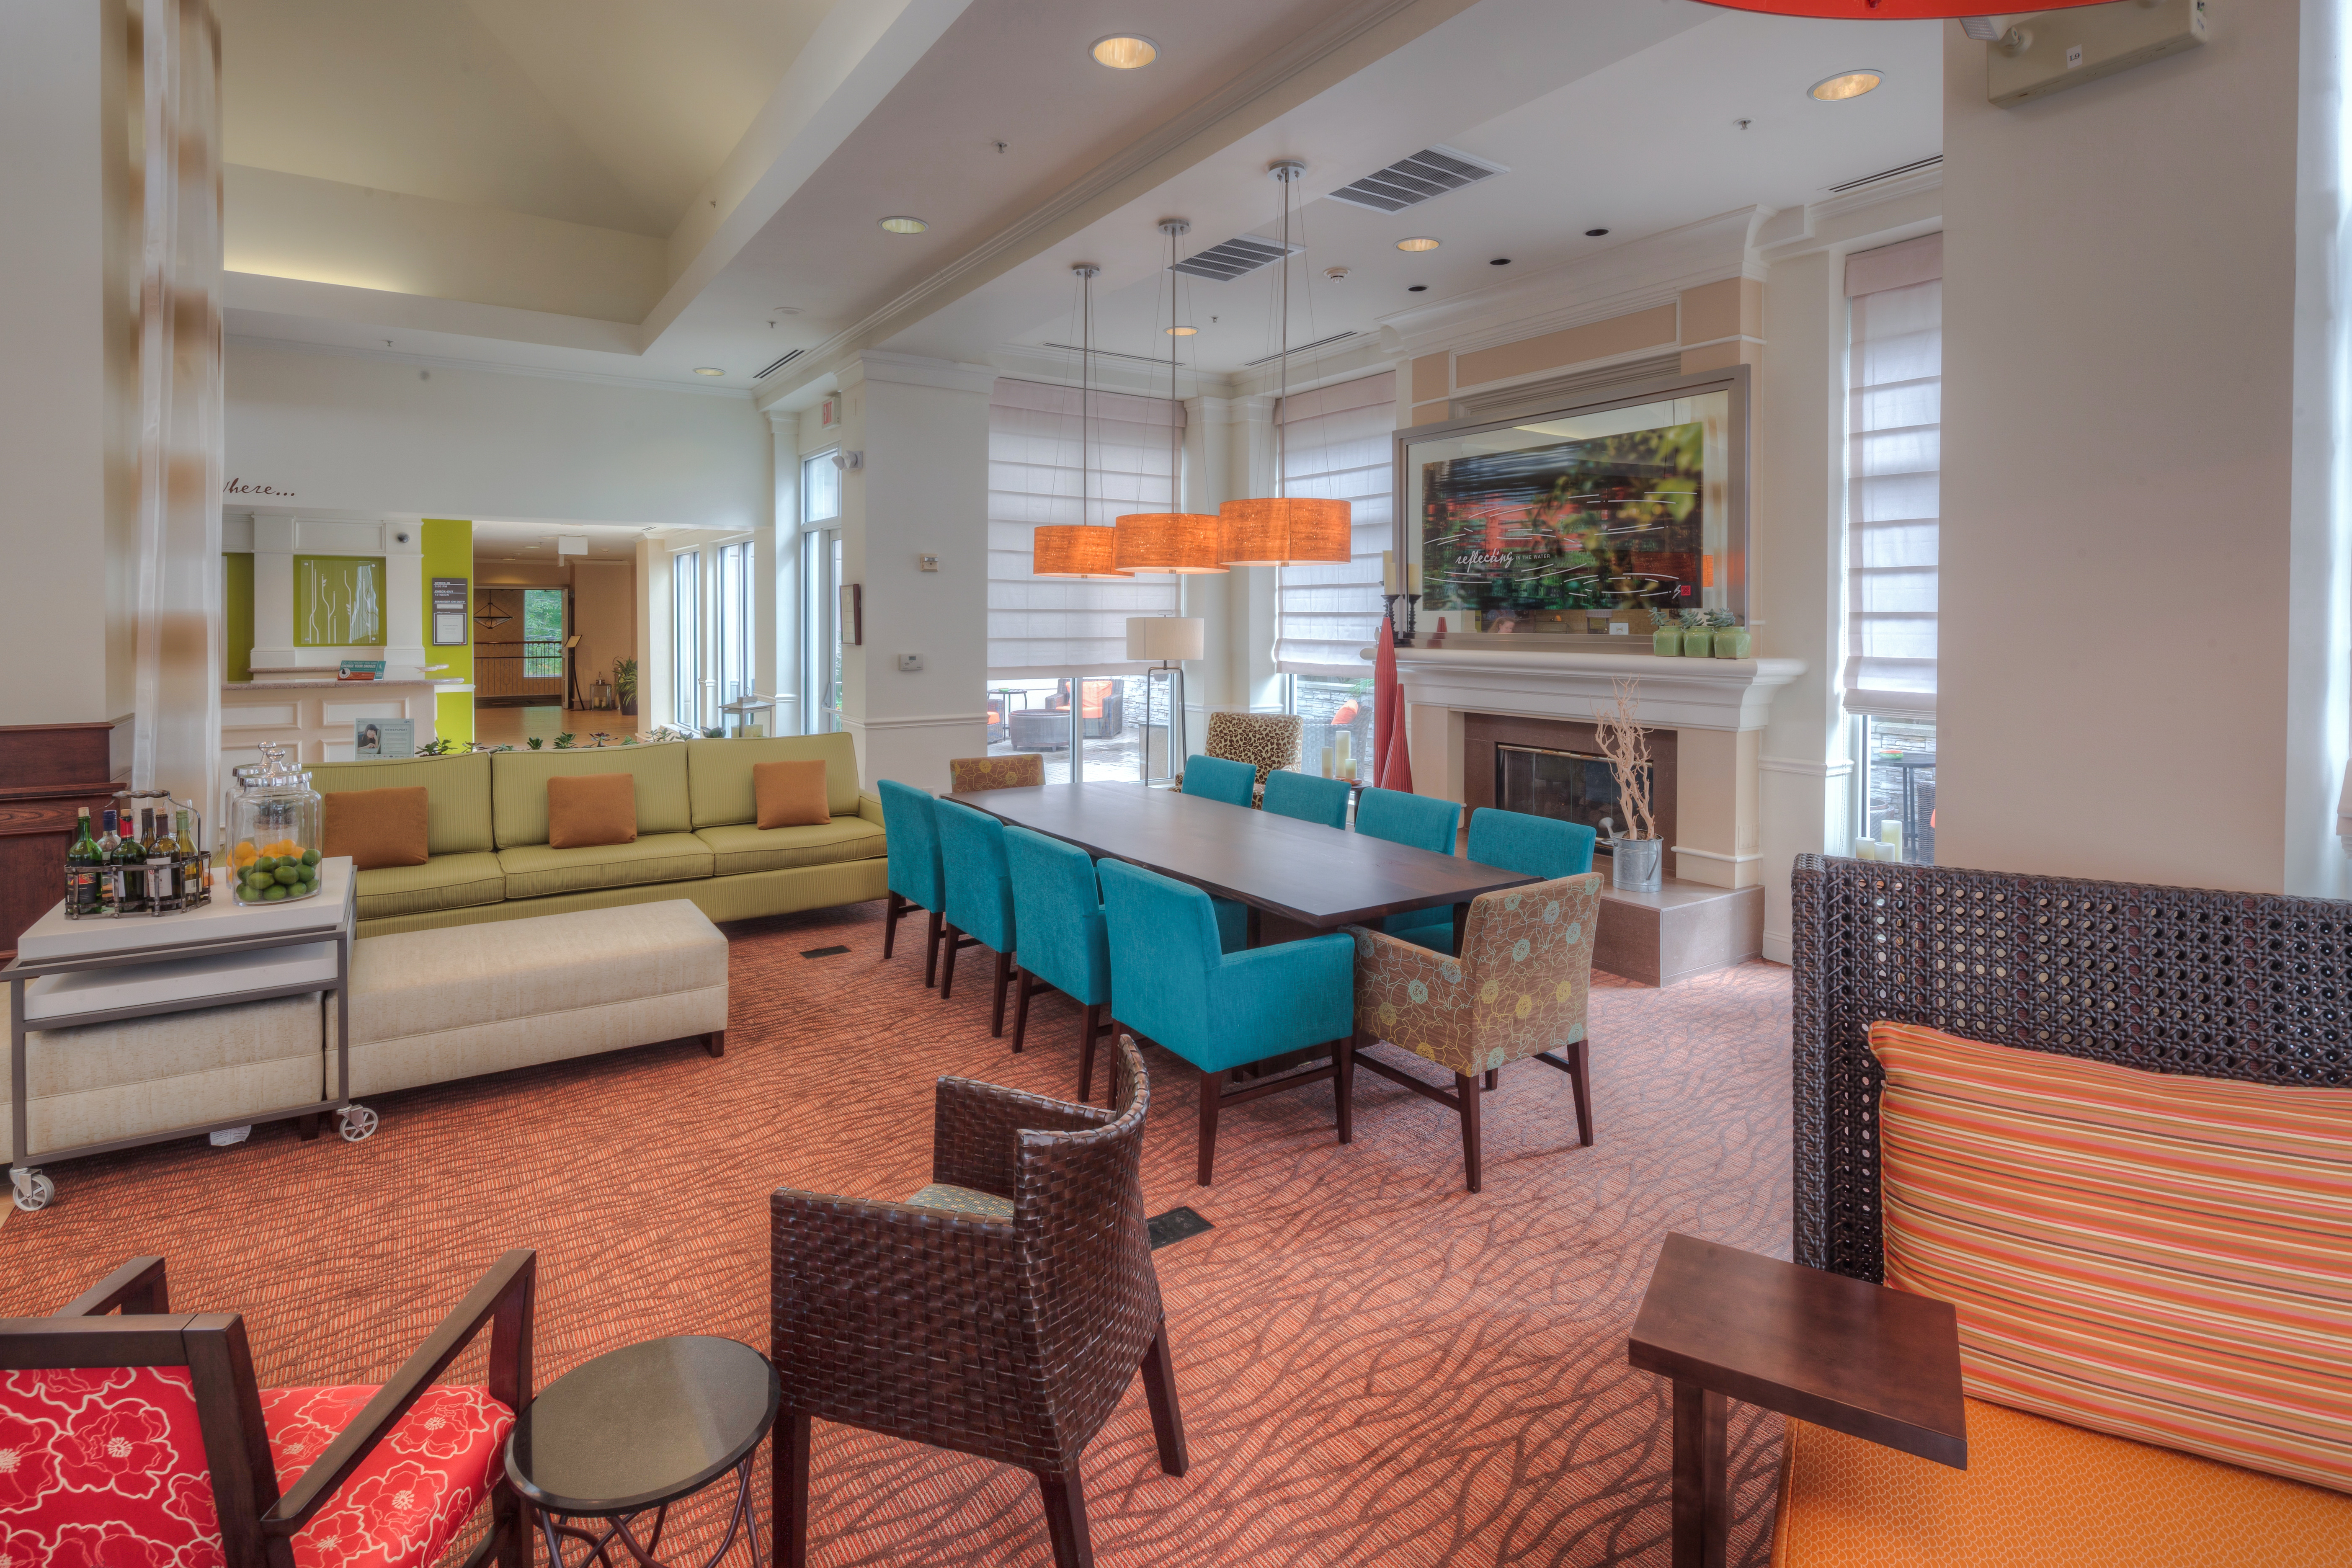 Soft Seating, Wall Art, Table With Seating for 10 by Fireplace in Lobby Lounge Area